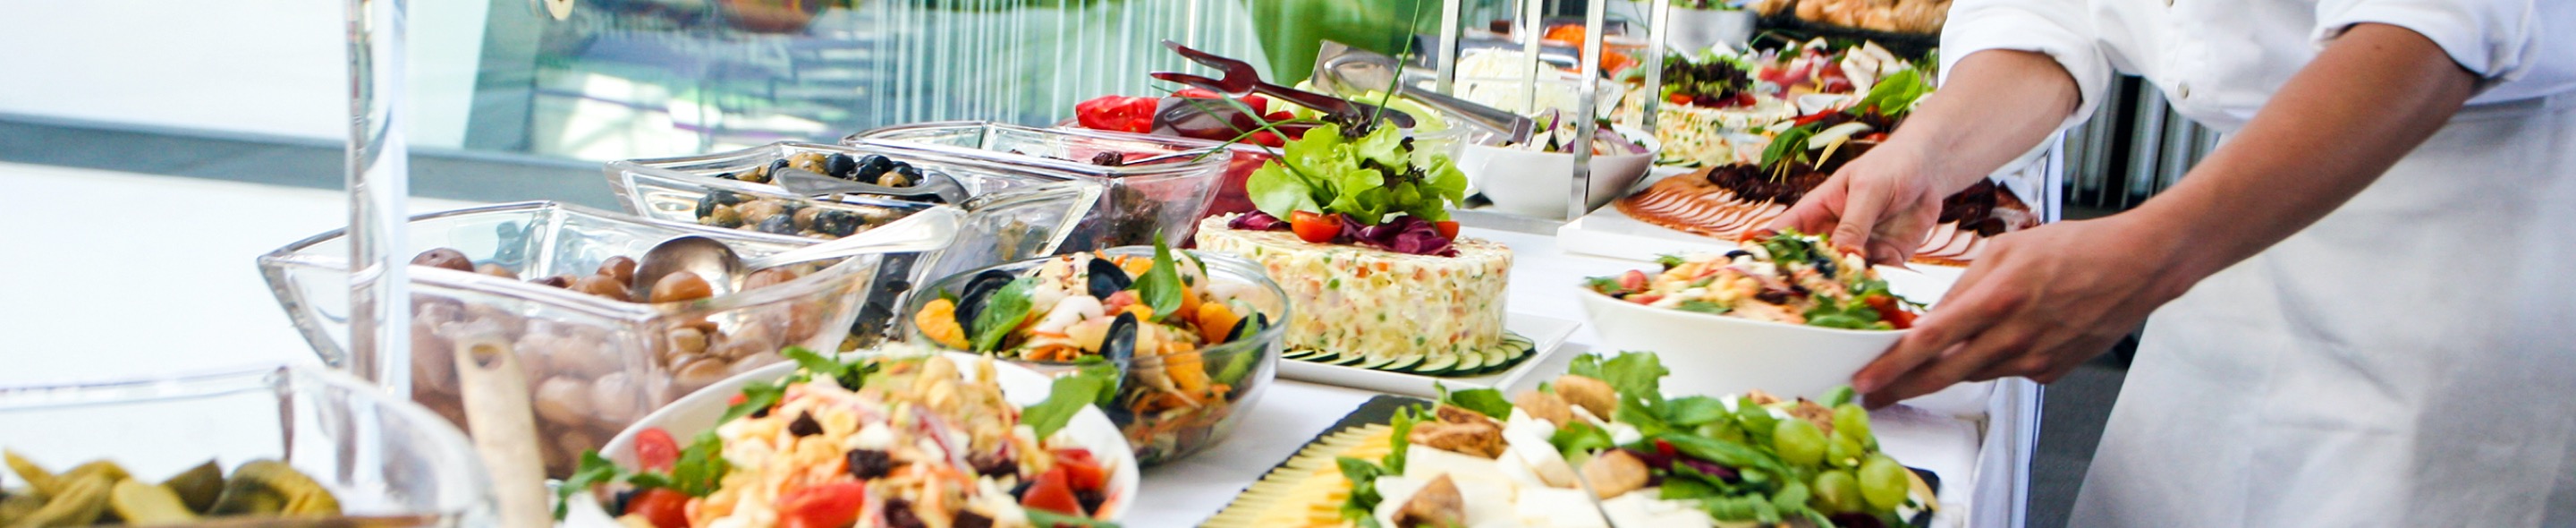 Catering Polkowice